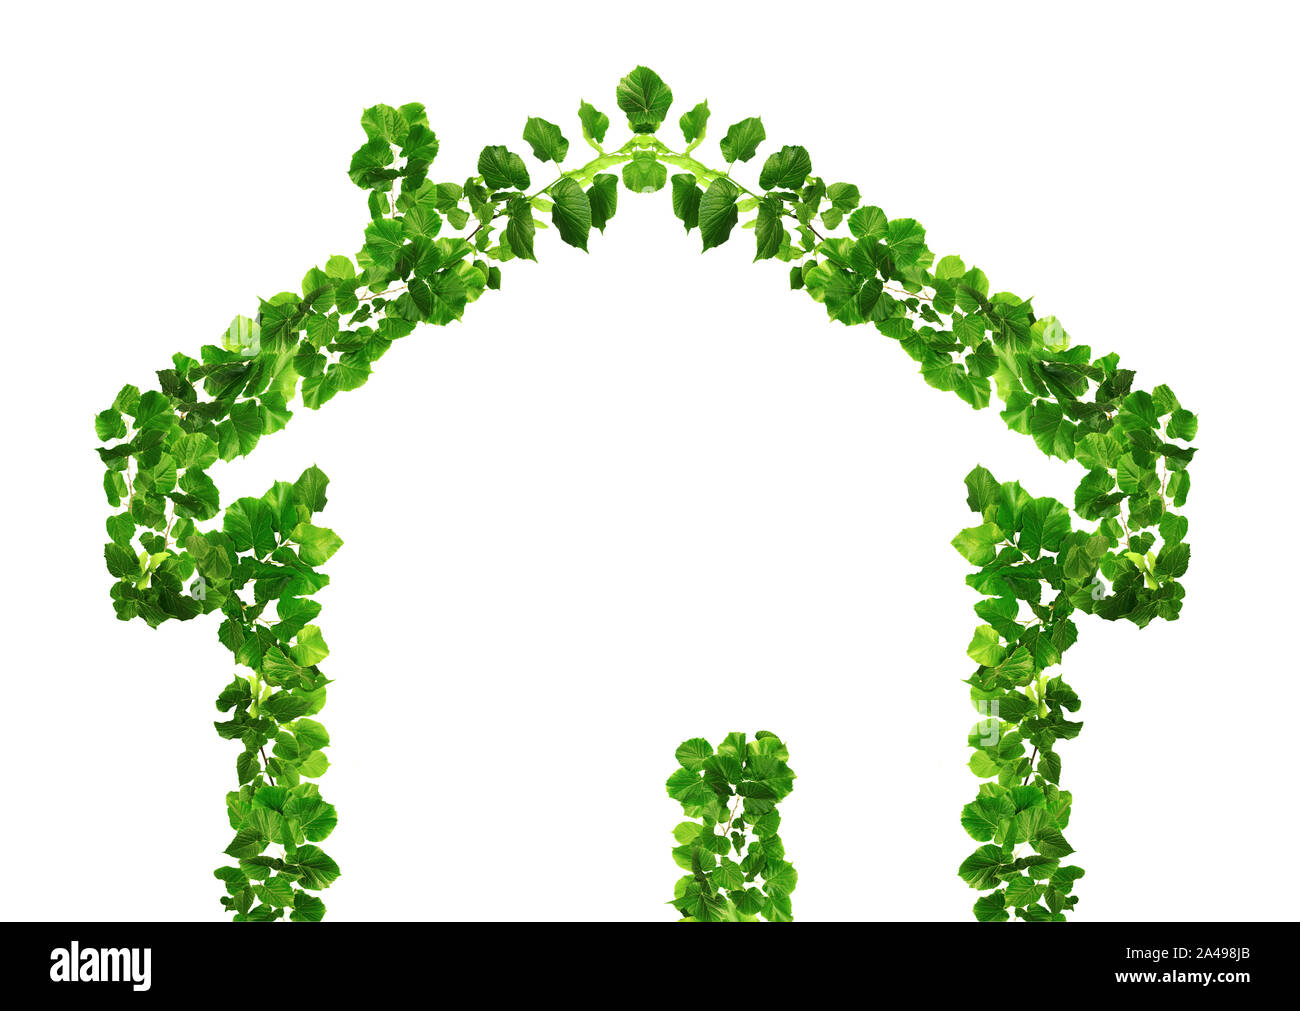 Foliage symbolizing construction by ecological and economic means. Stock Photo